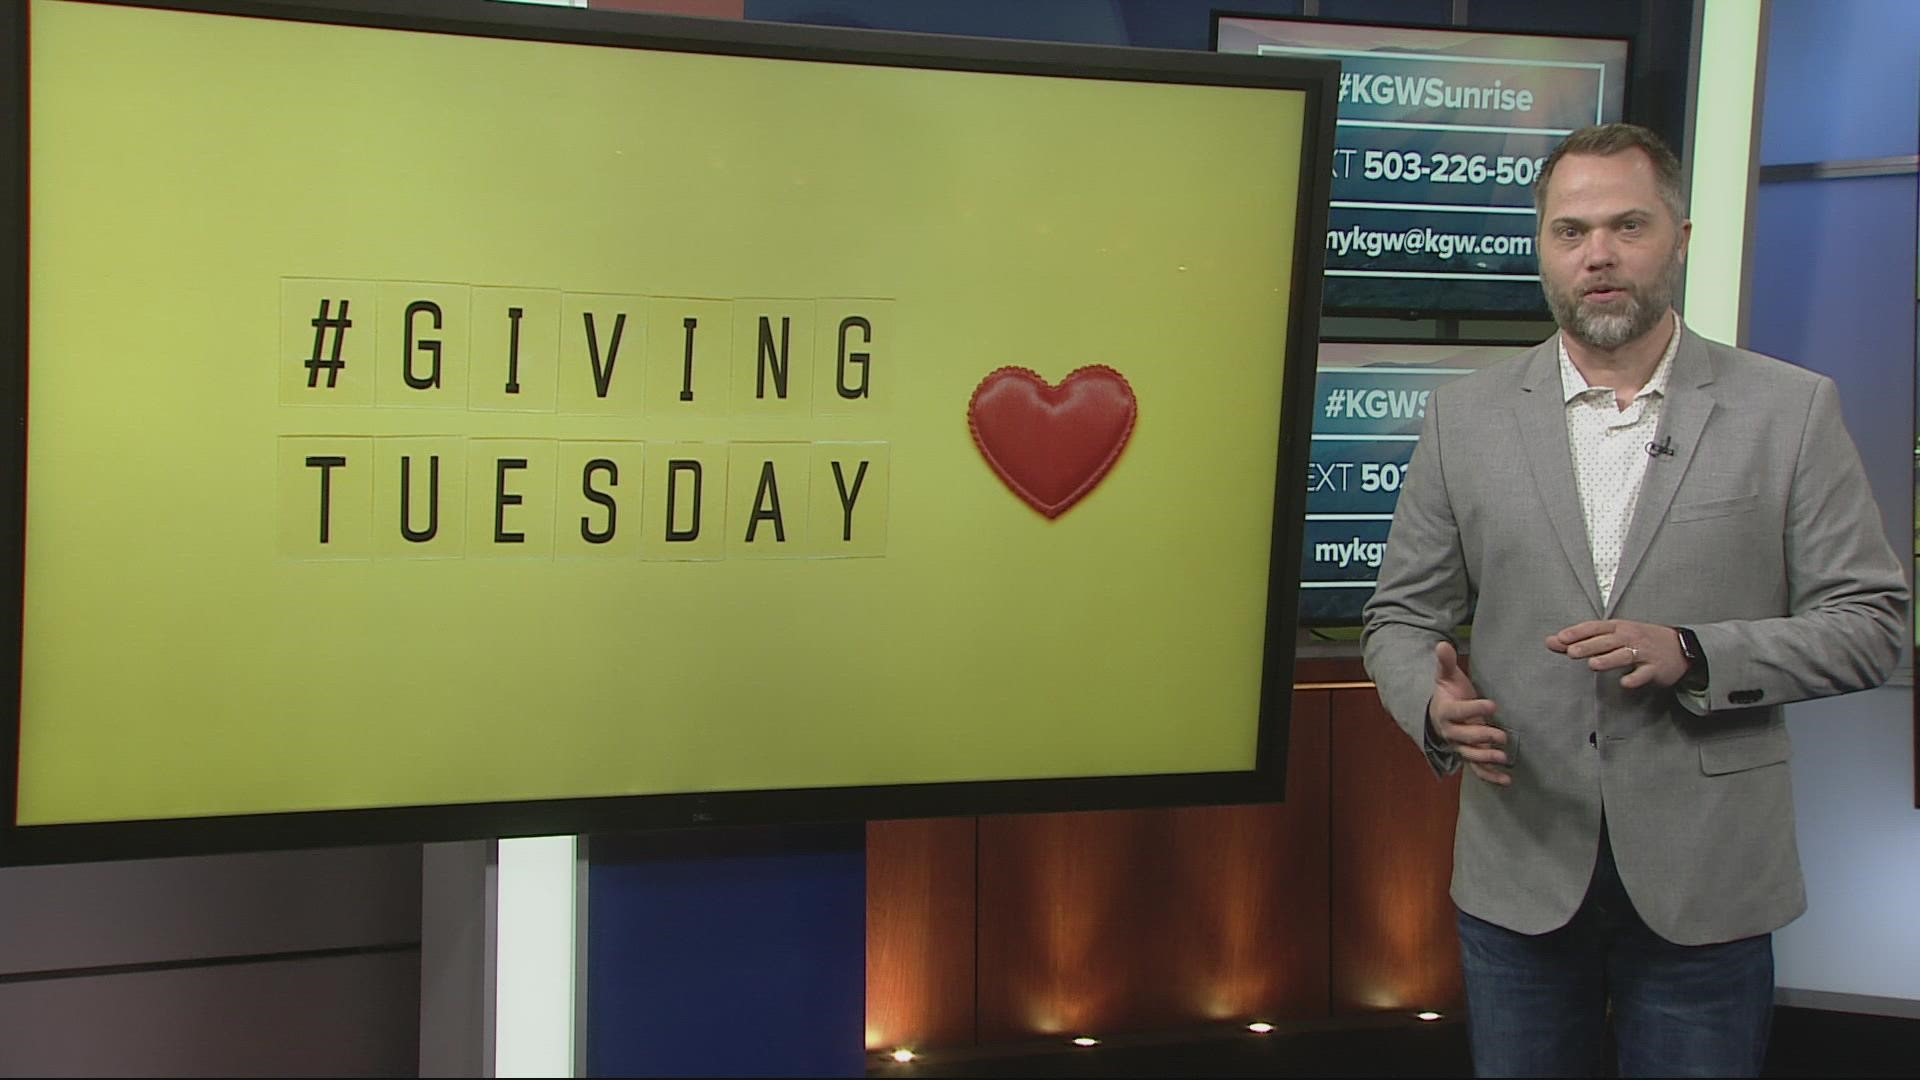 Nonprofits in need of donations this Giving Tuesday.